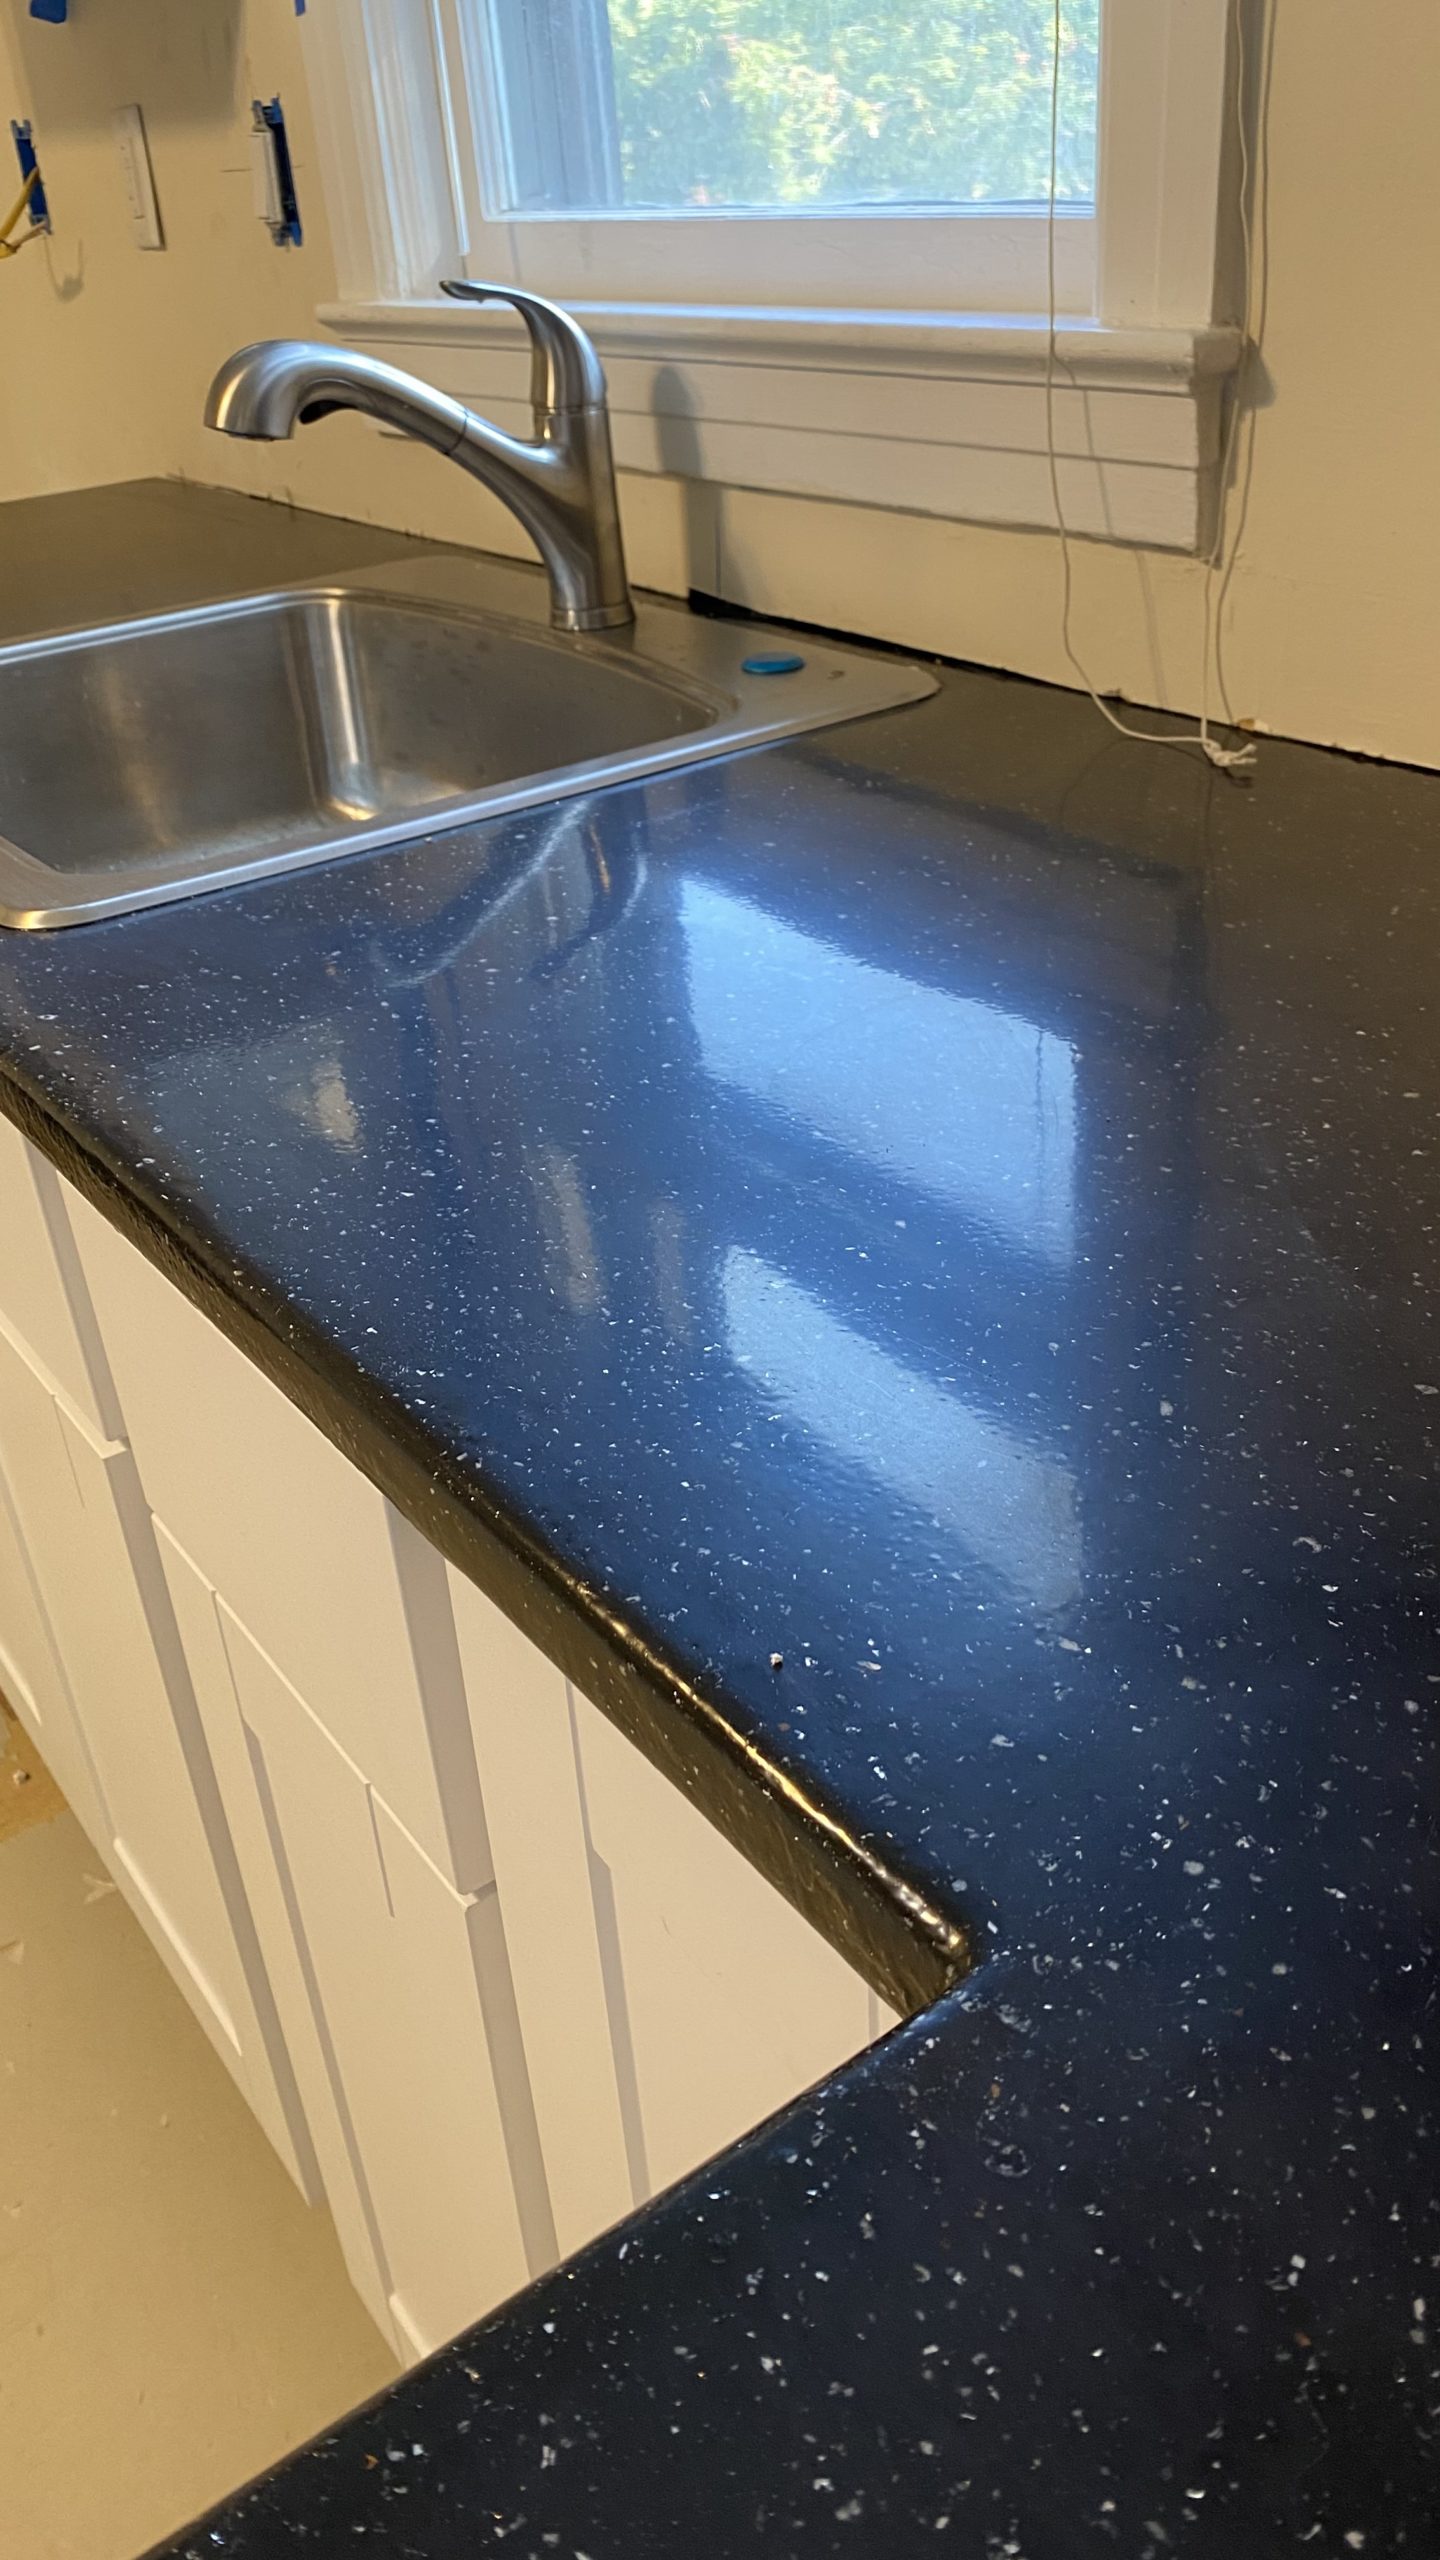 Scratch and UV Resistant Epoxy for New or Resurfacing Countertops